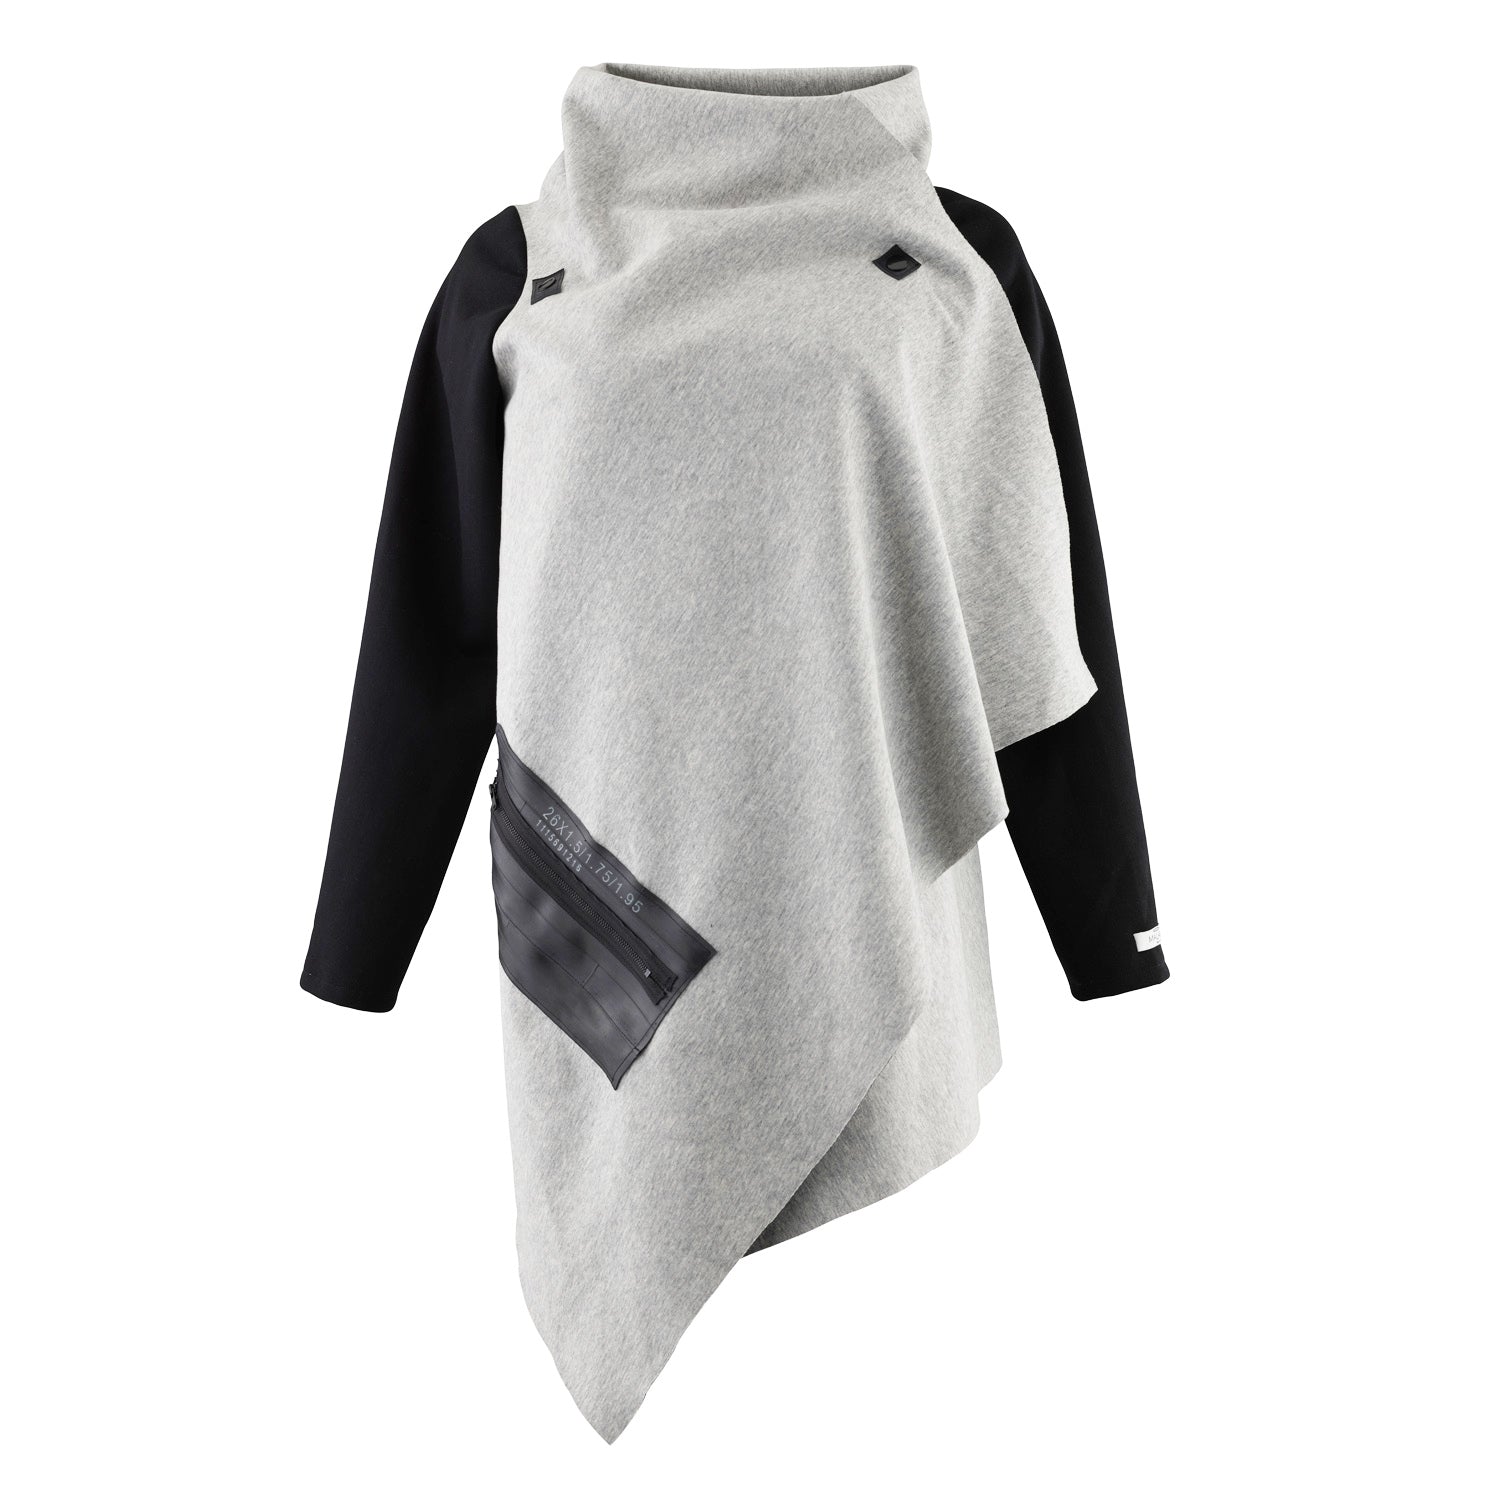 A grey cardigan with a black squared zipper pocket and black sleeves by Malaika New York